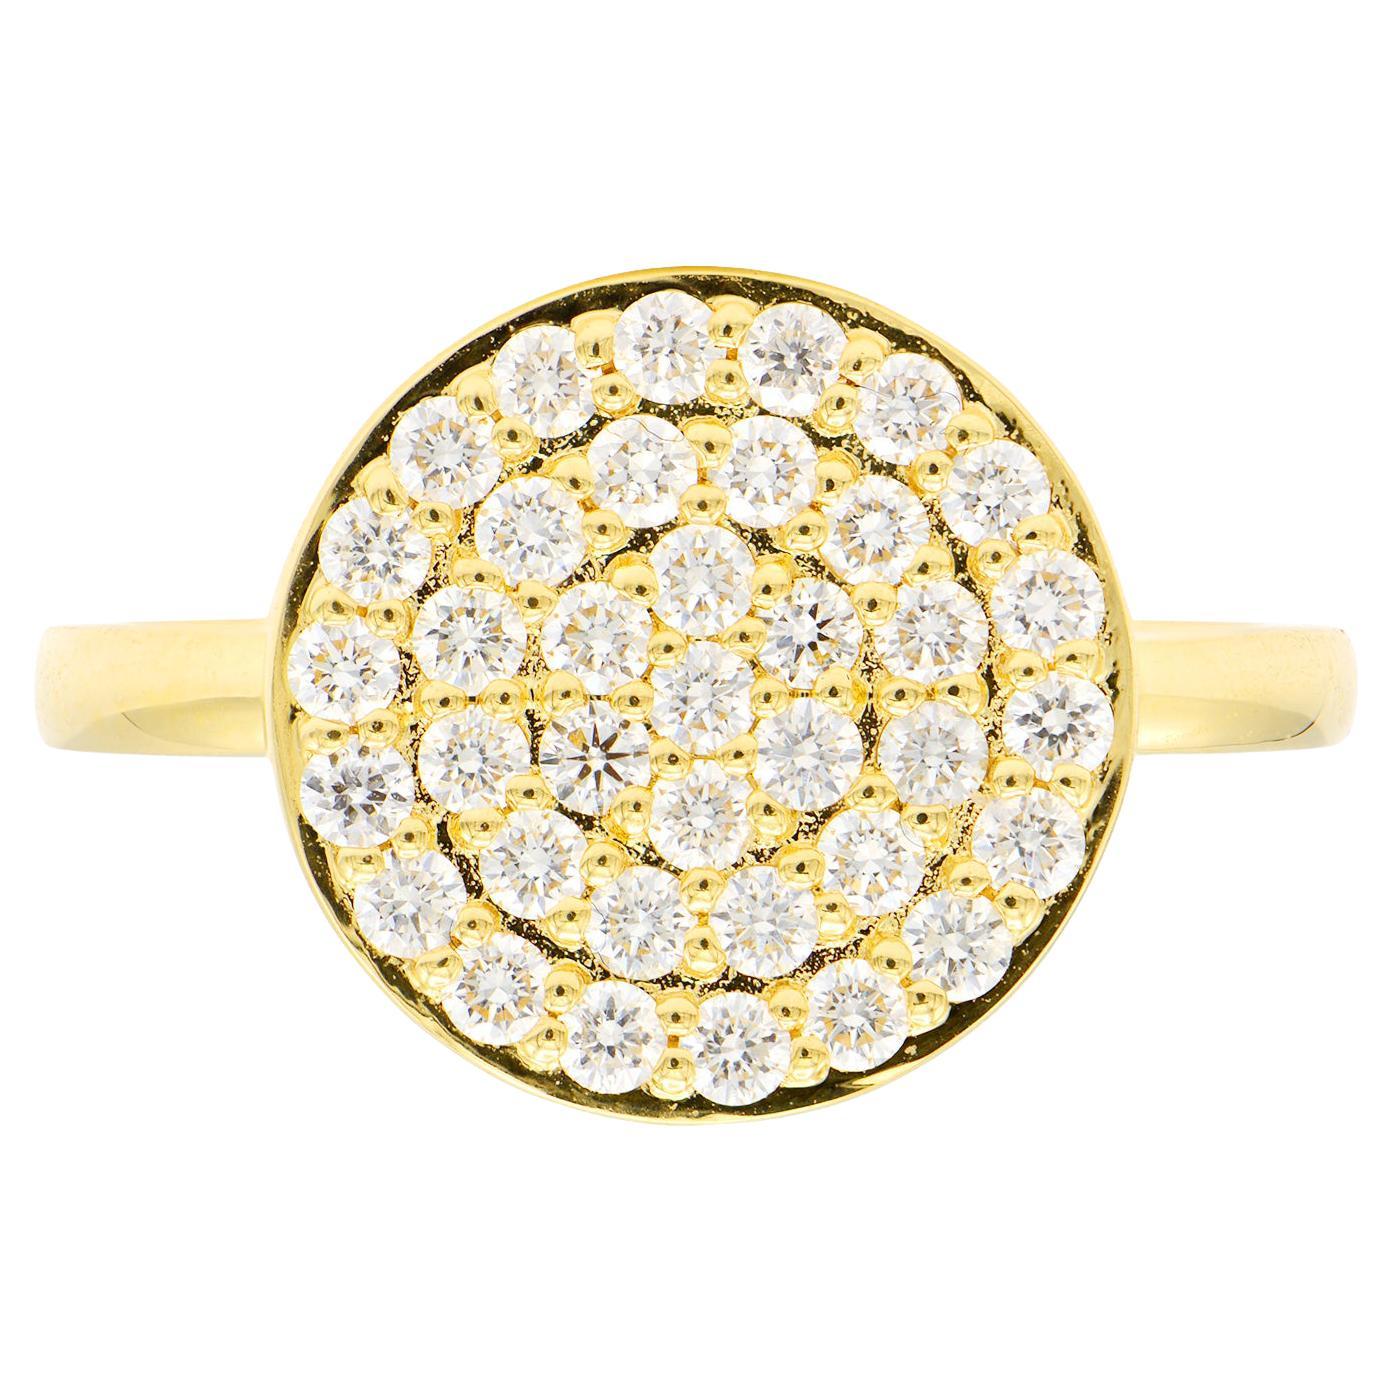 14K Yellow Gold Diamond Pave Ring For Sale